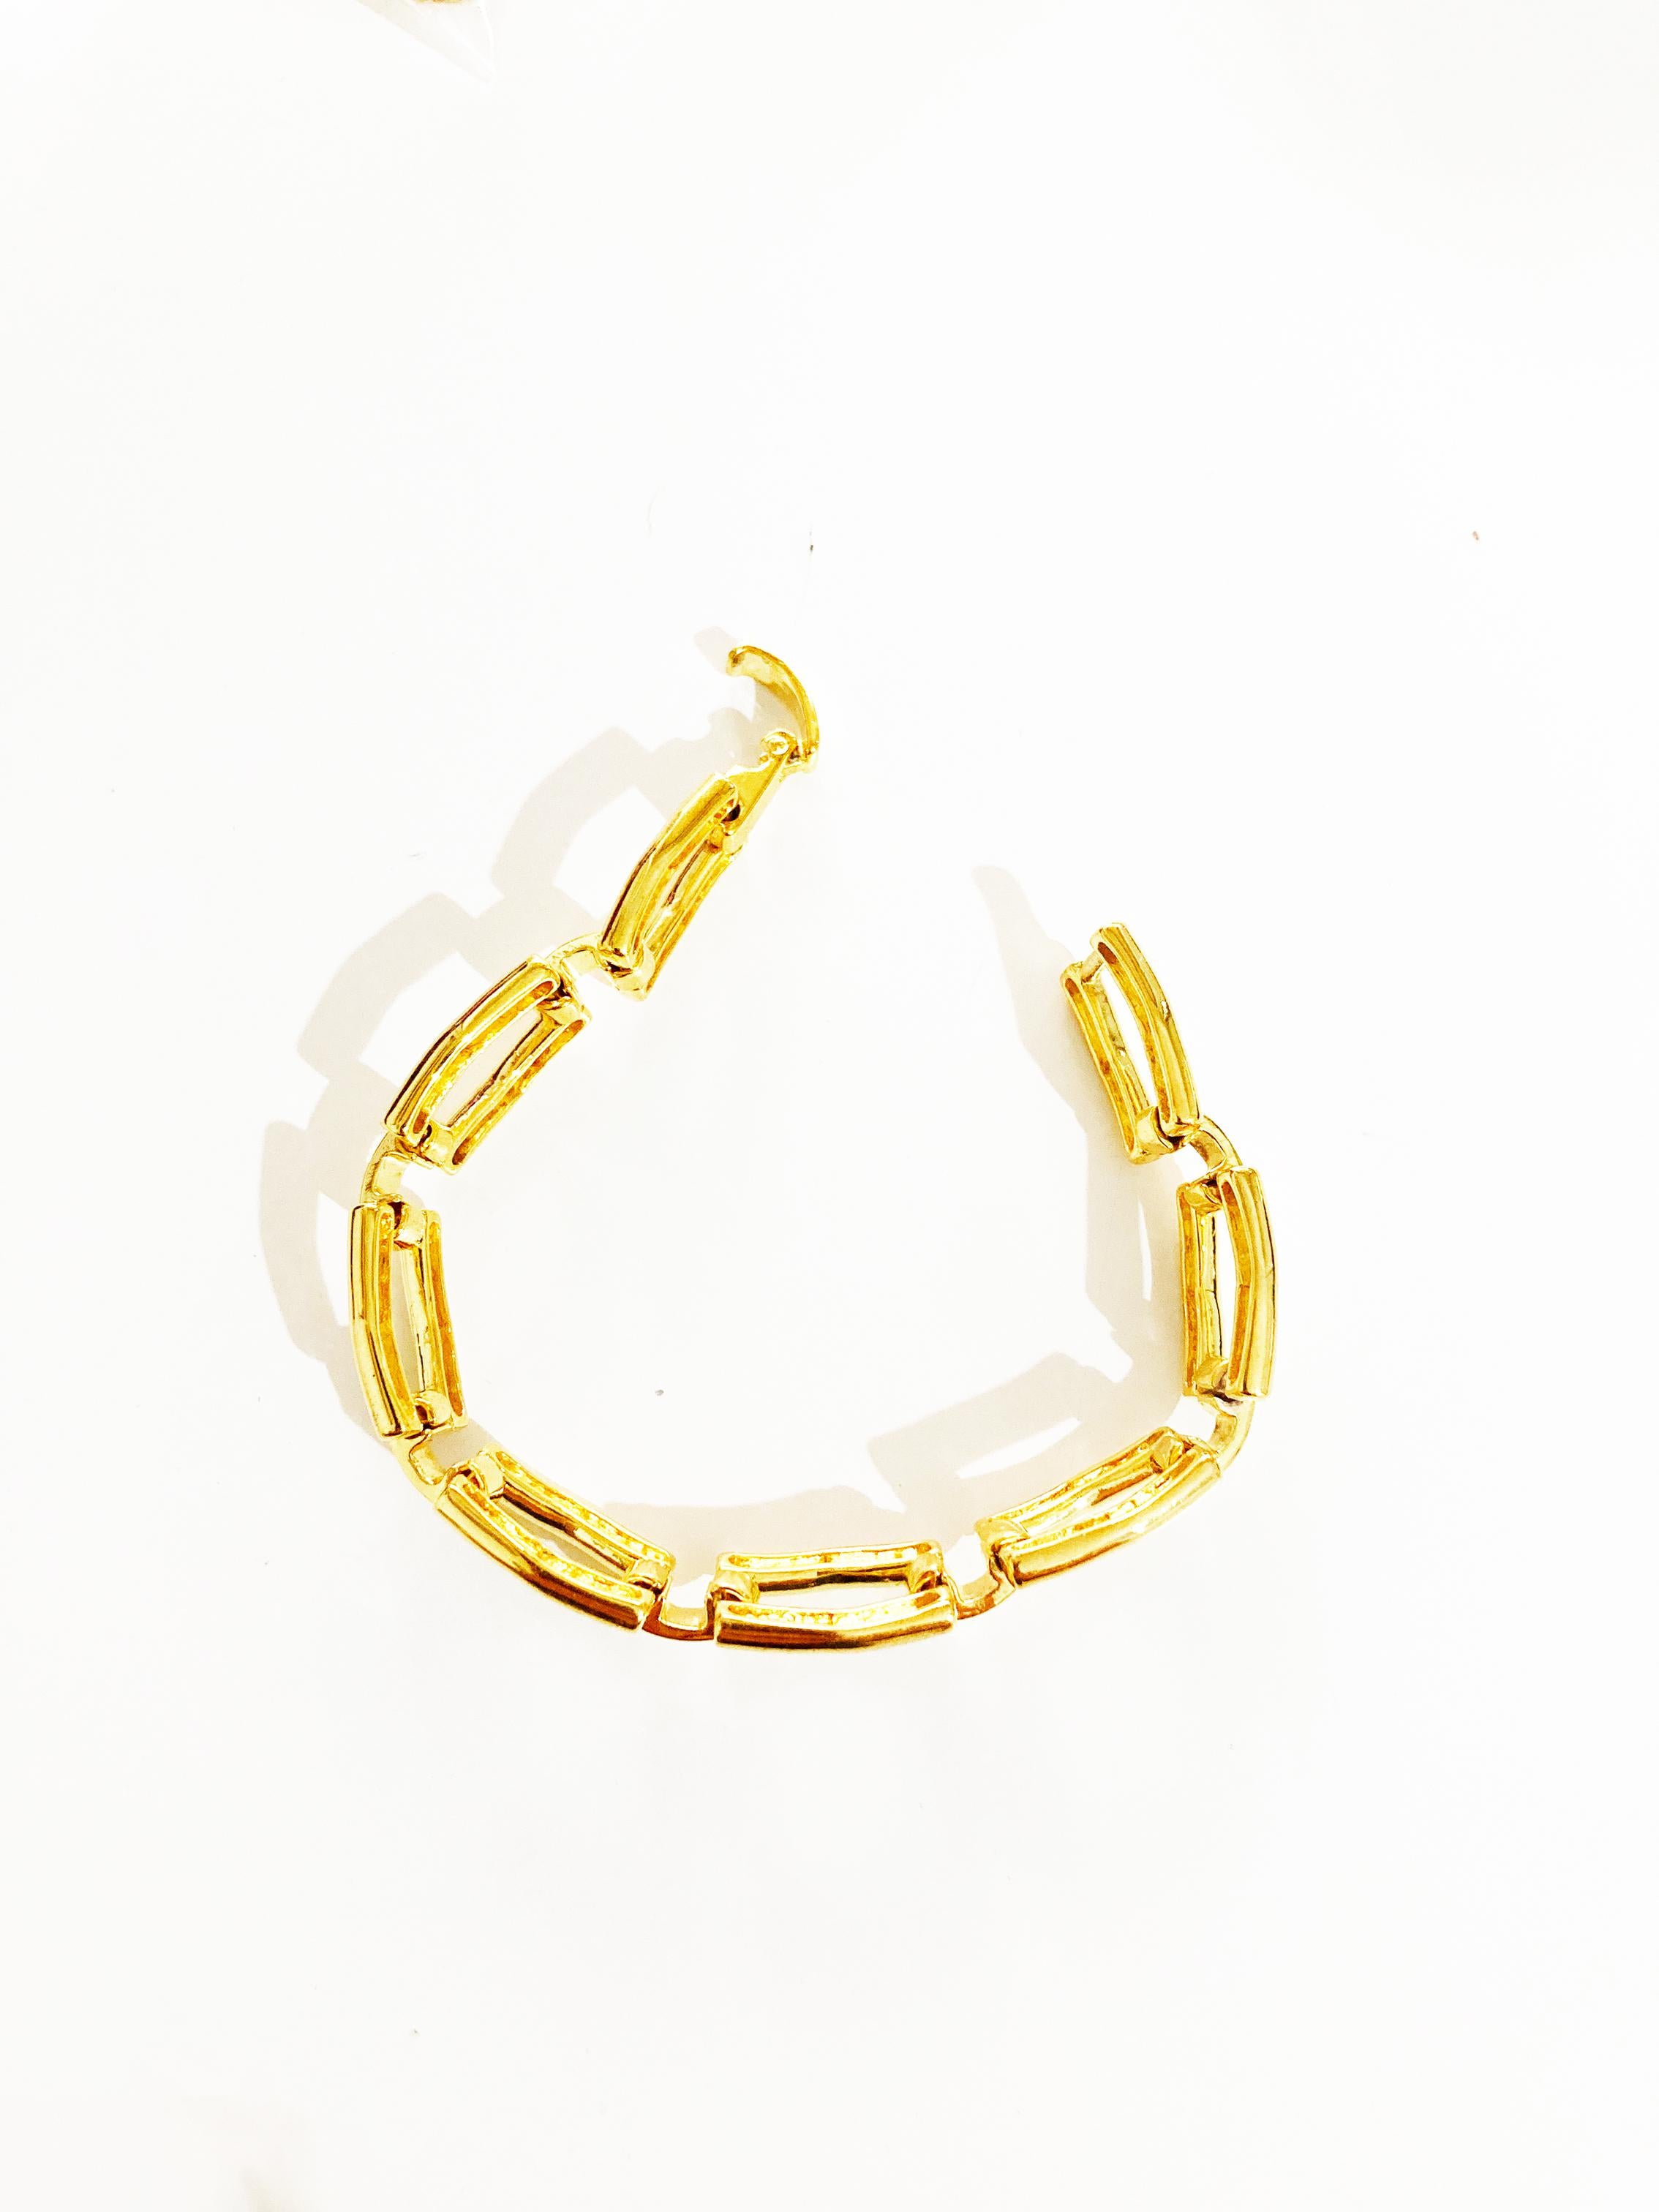 Rossella Ugolini 24K Yellow Gold Plated Unique Links Chain Bracelet For Sale 1